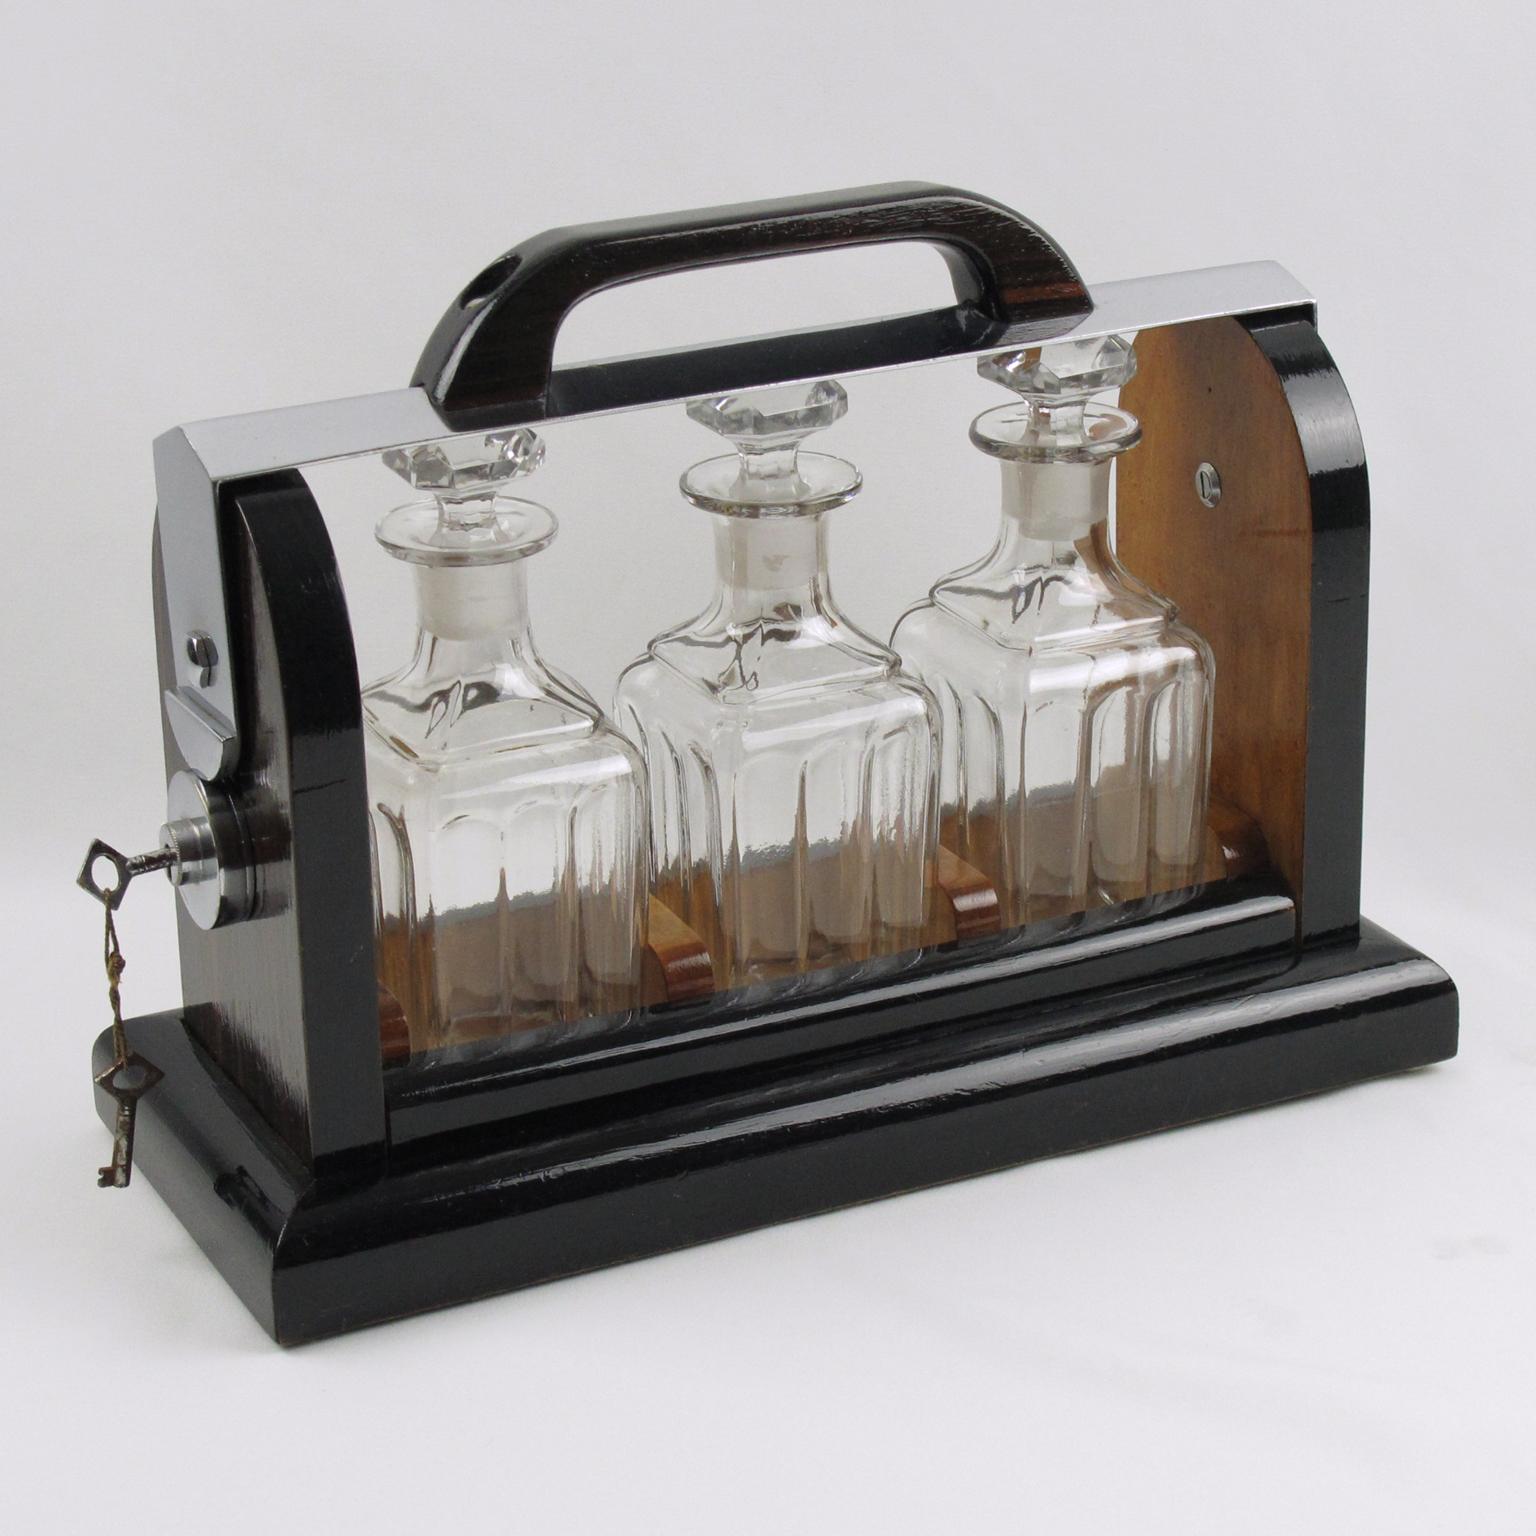 Stylish tantalus or cave à liqueur, barware accessory made in France during the Art Deco period. The geometric mounted case is made of varnish Macassar and burl walnut with large chromed metal carrying arm and dark wood handle. Three cut-glass